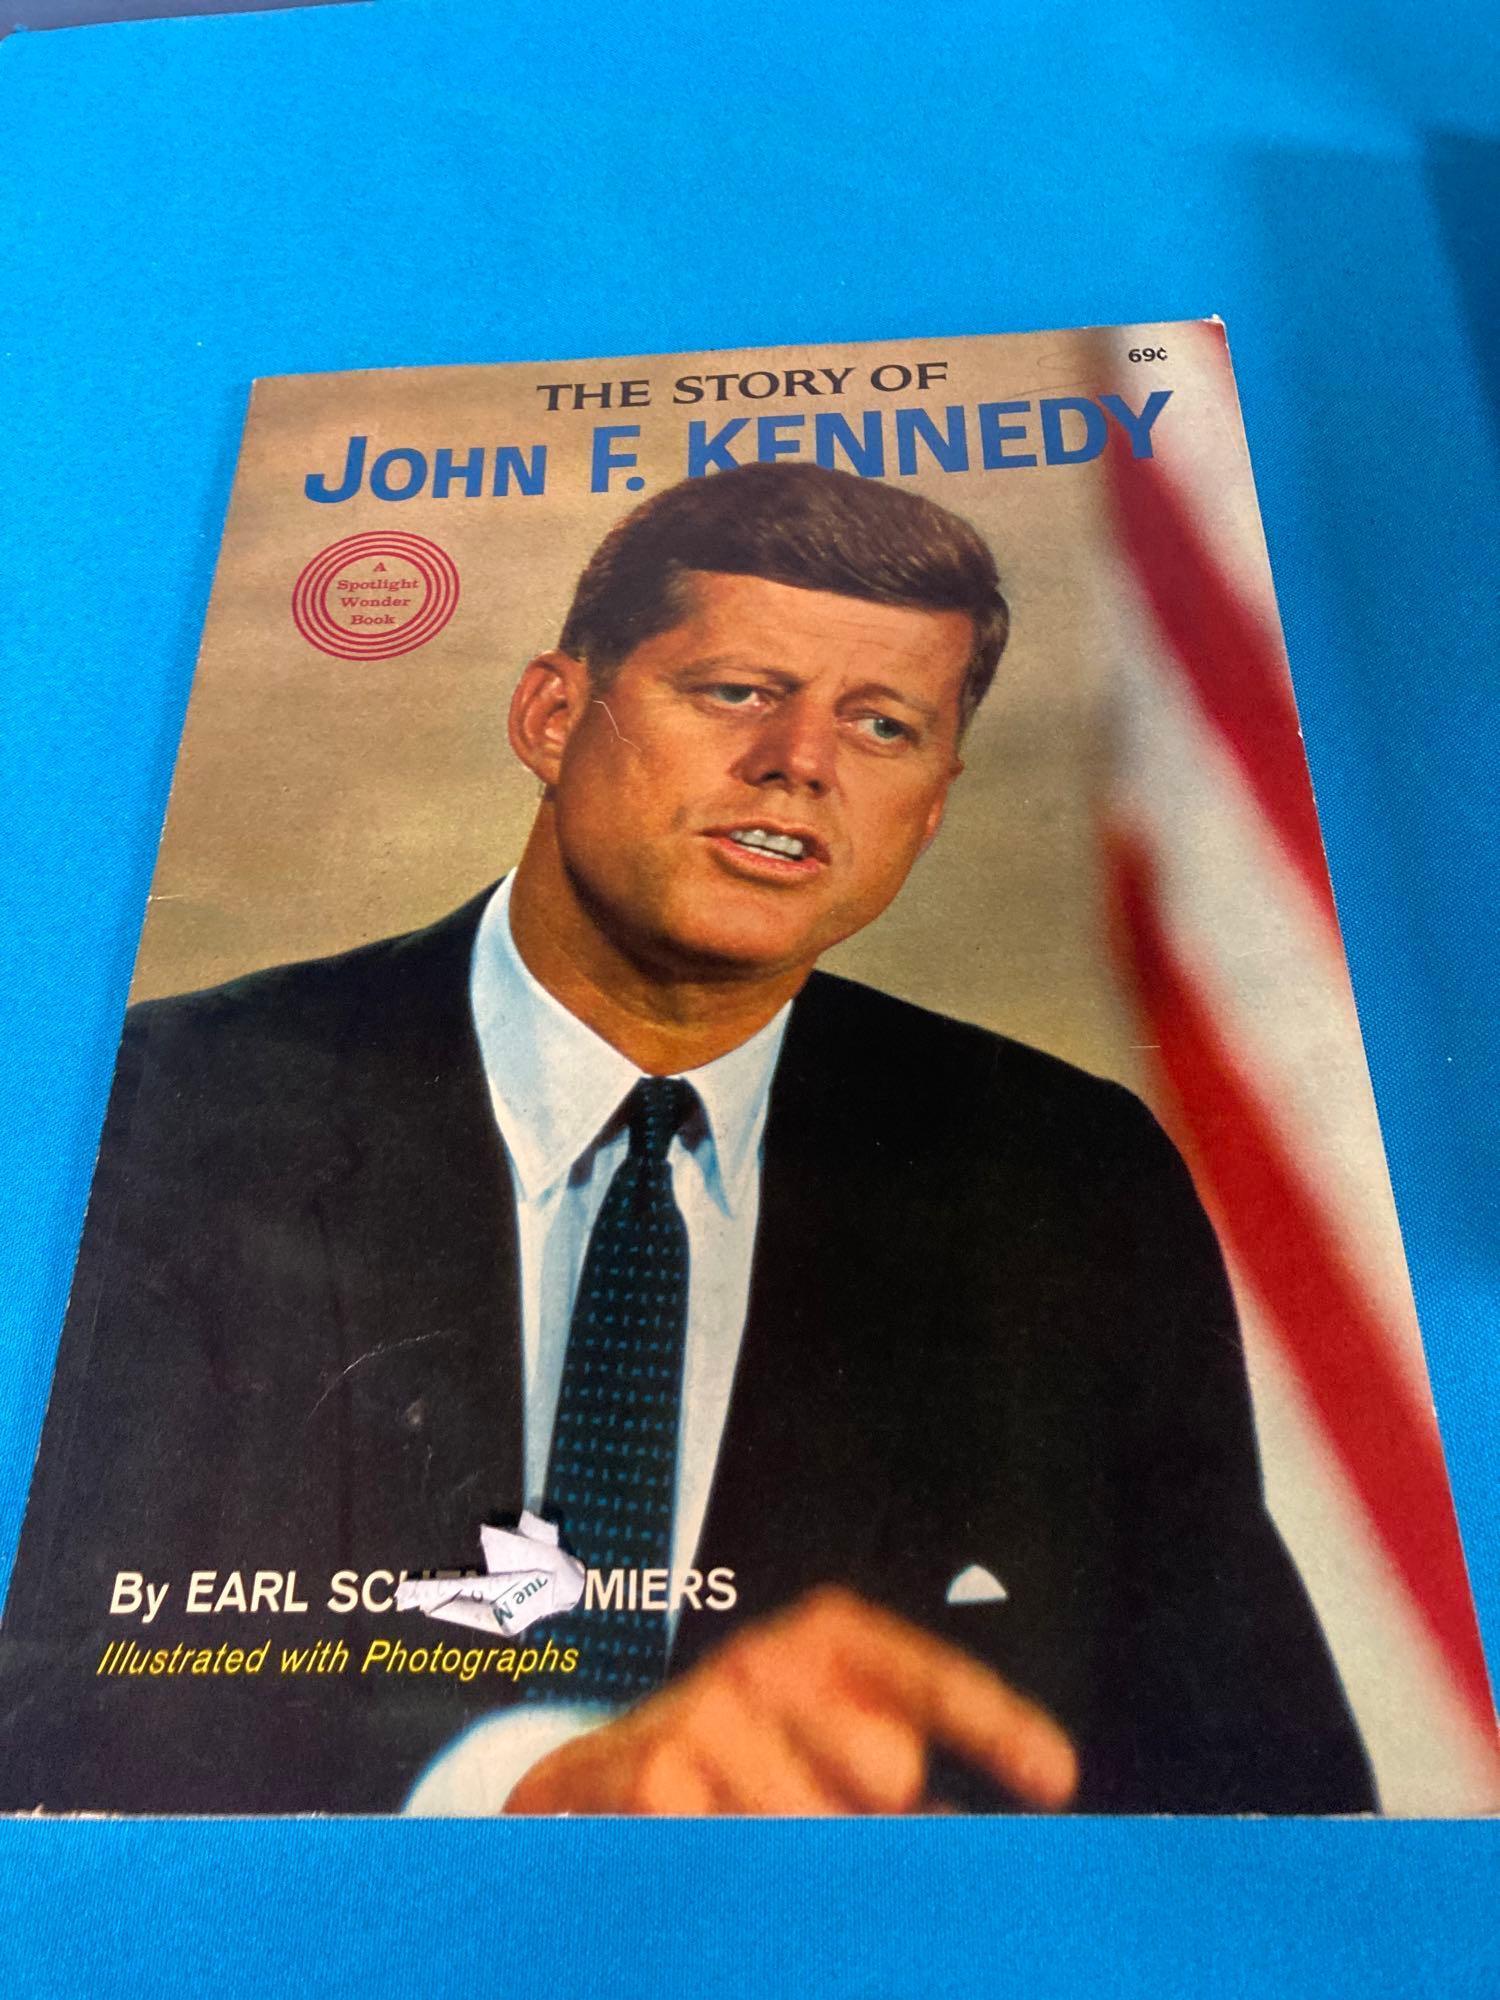 JFK book and newspapers about assassination